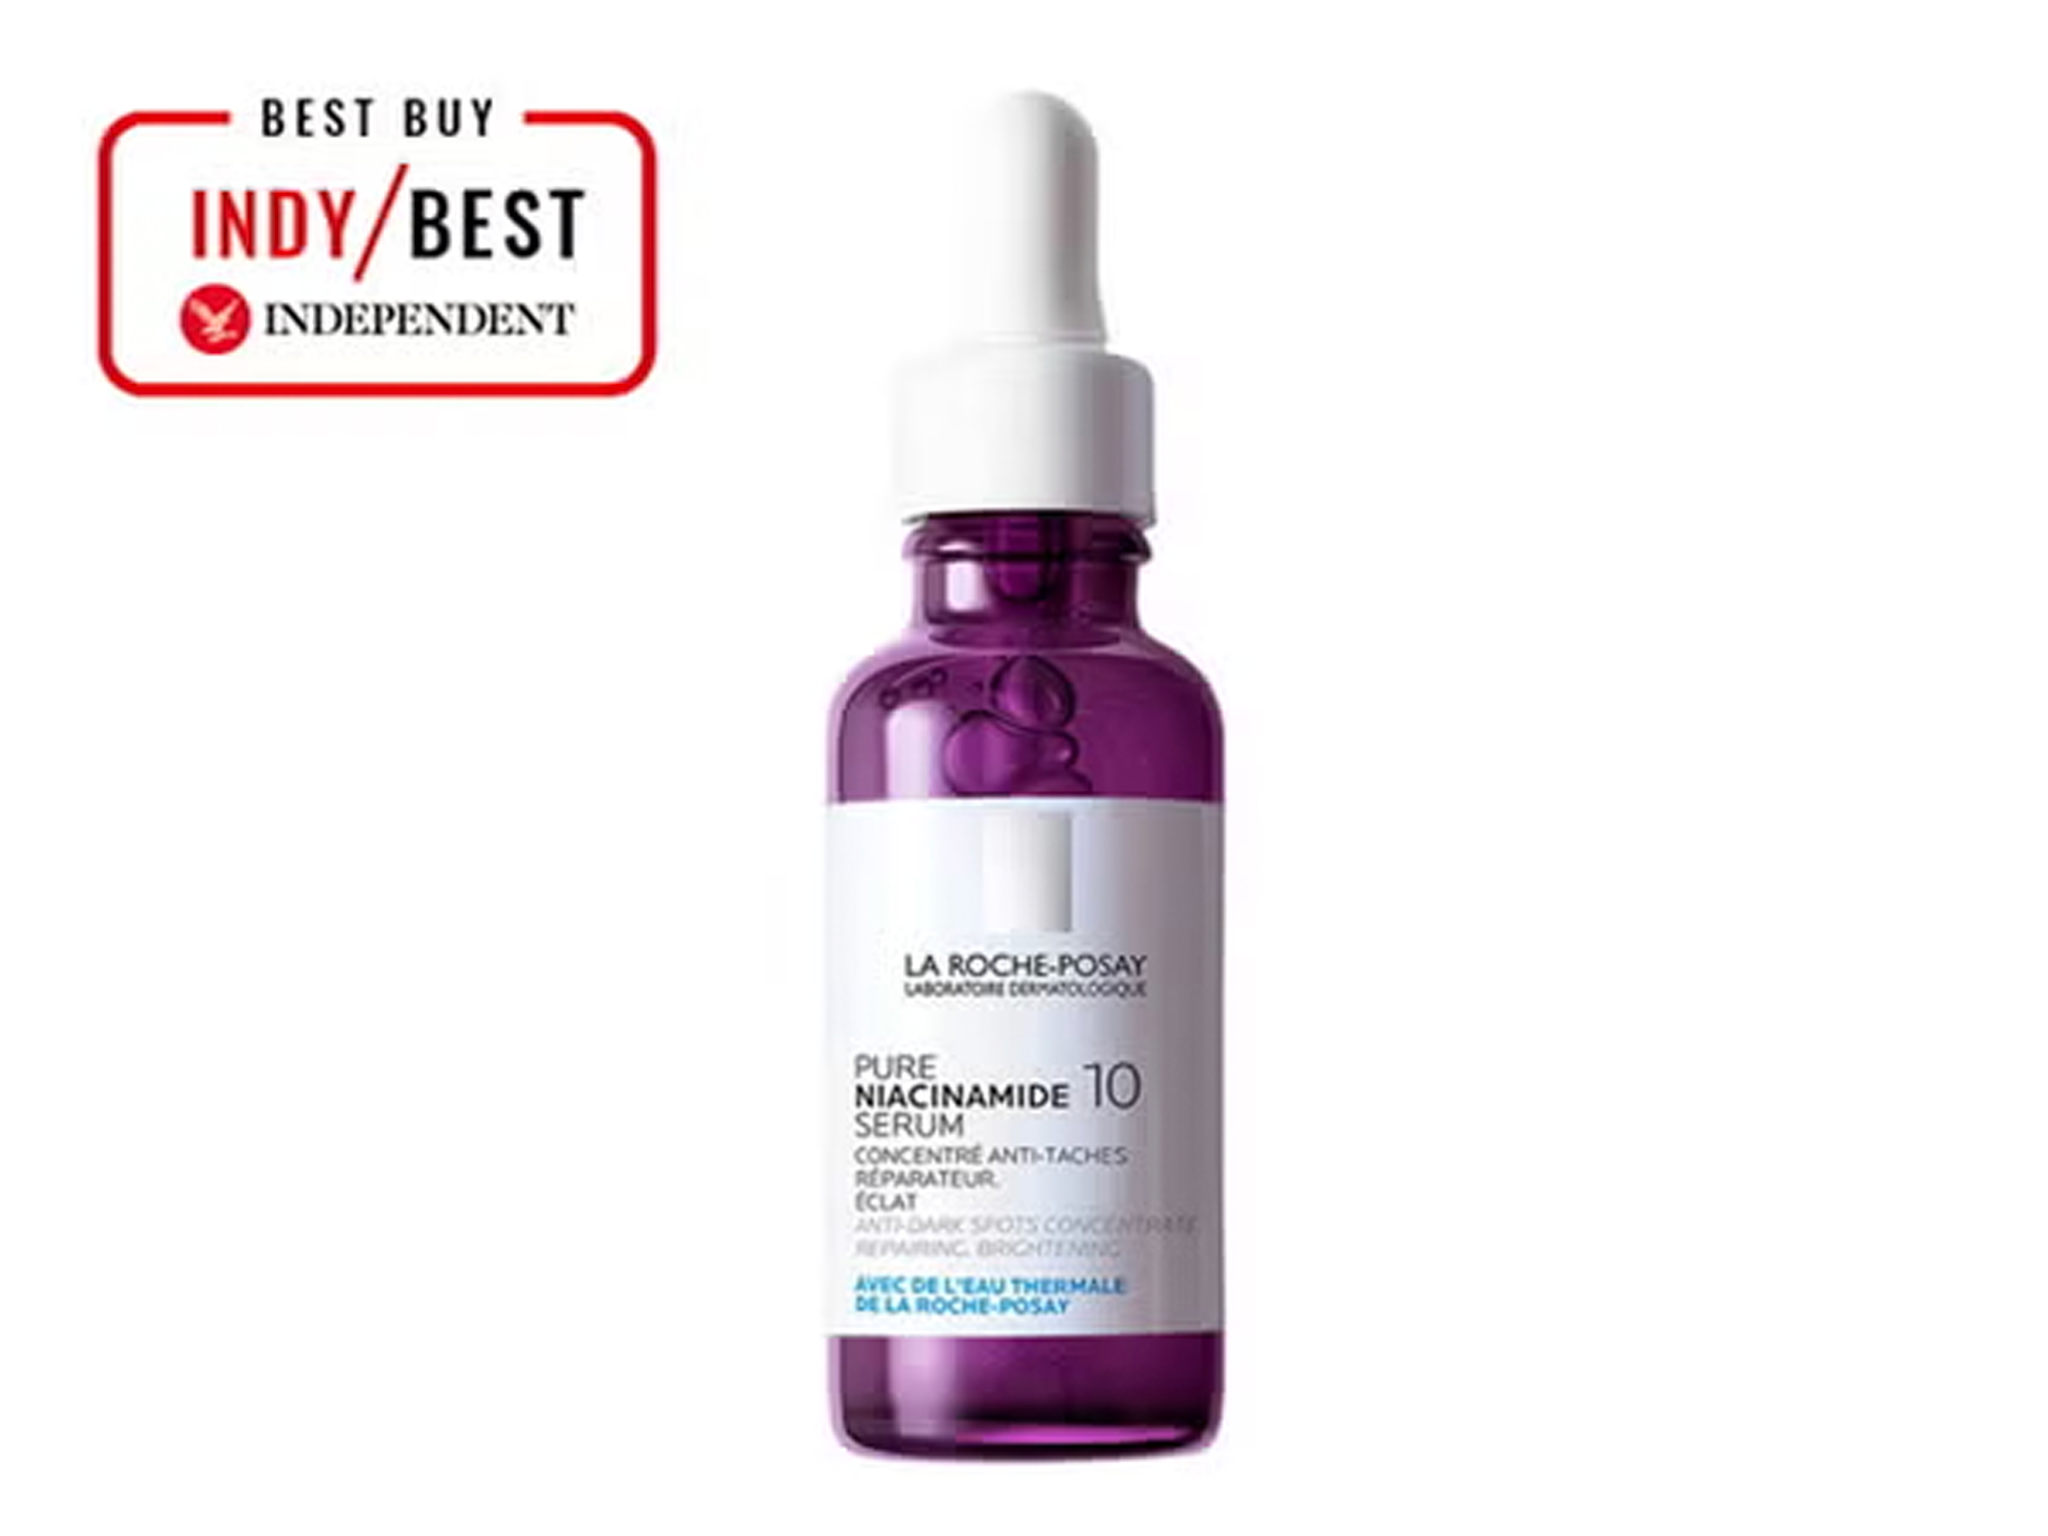 La roche posay best skincare products for hyperpigmentation indybest